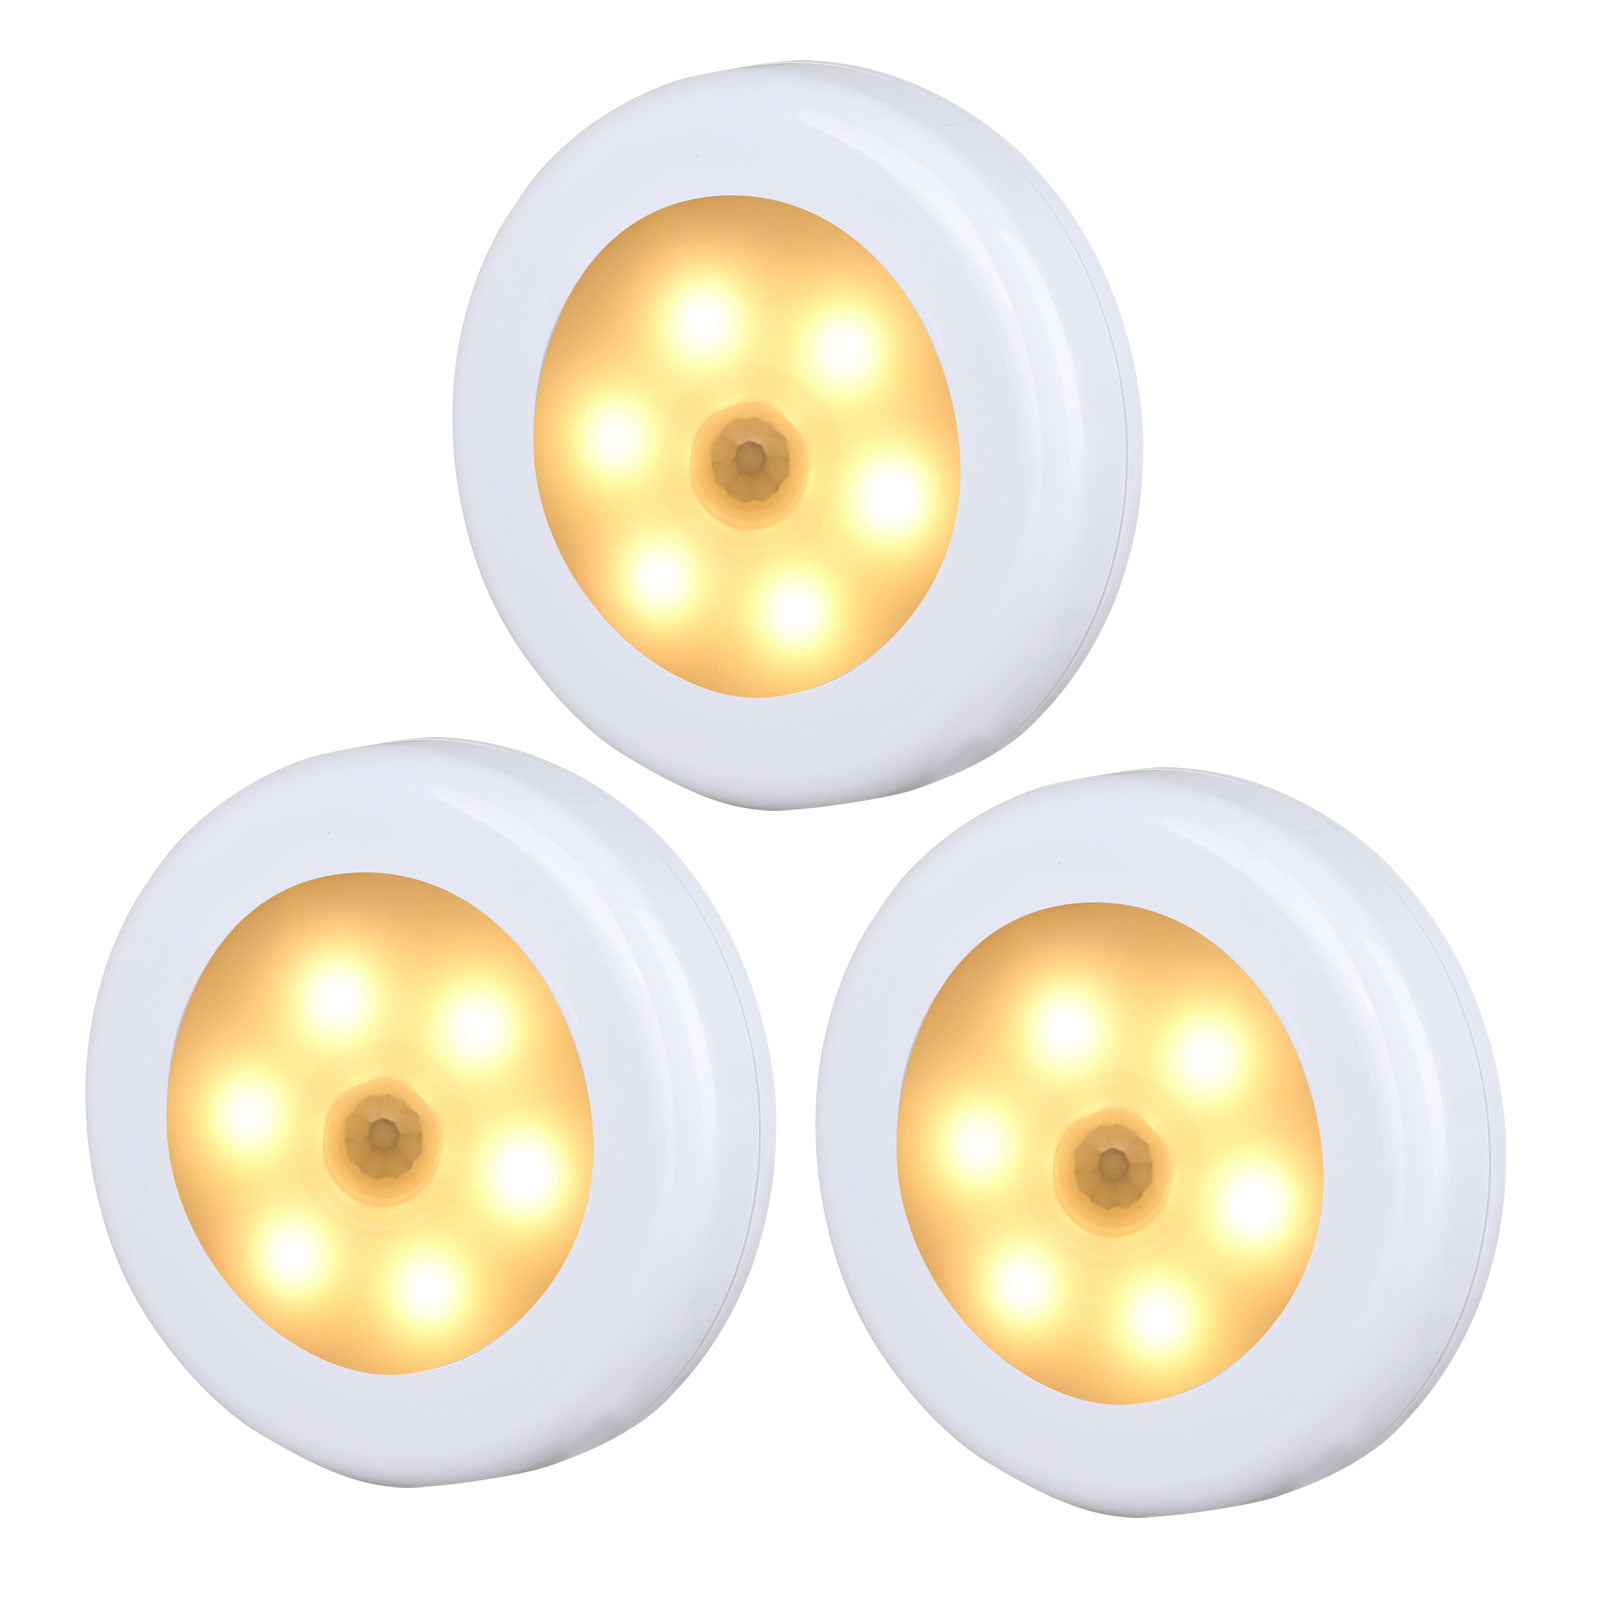 Battery Operated Lights Wall Light Cabinet Pack of 6 Motion Sensor Light Stick Anywhere with No Tools Perfect for Staircase Bathroom Closet Light LED Night Lights Hallway Bedroom Kitchen 